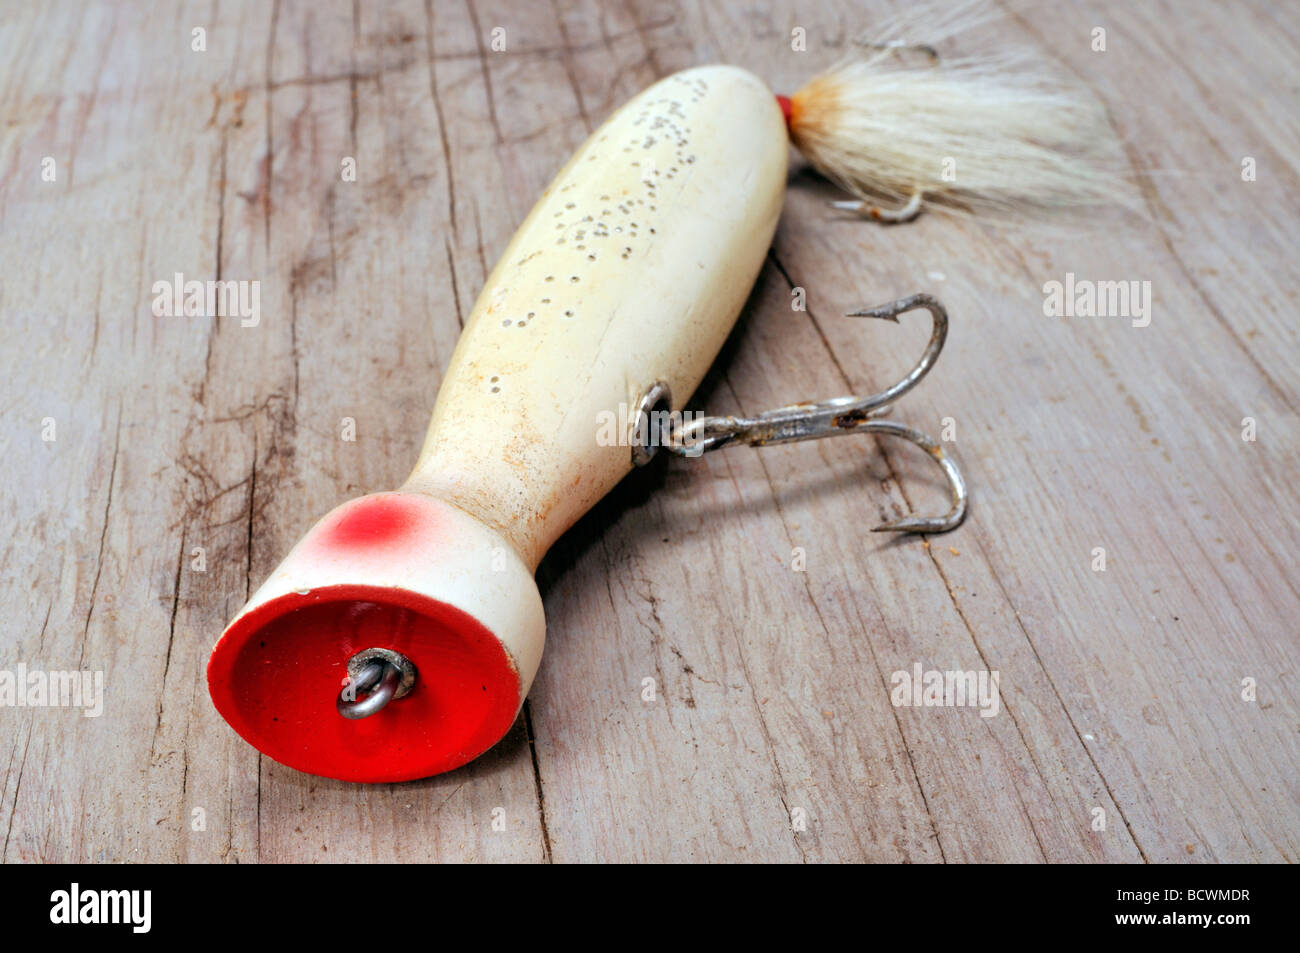 Salt water fishing lure on wood a plug or popper type lure Stock Photo -  Alamy